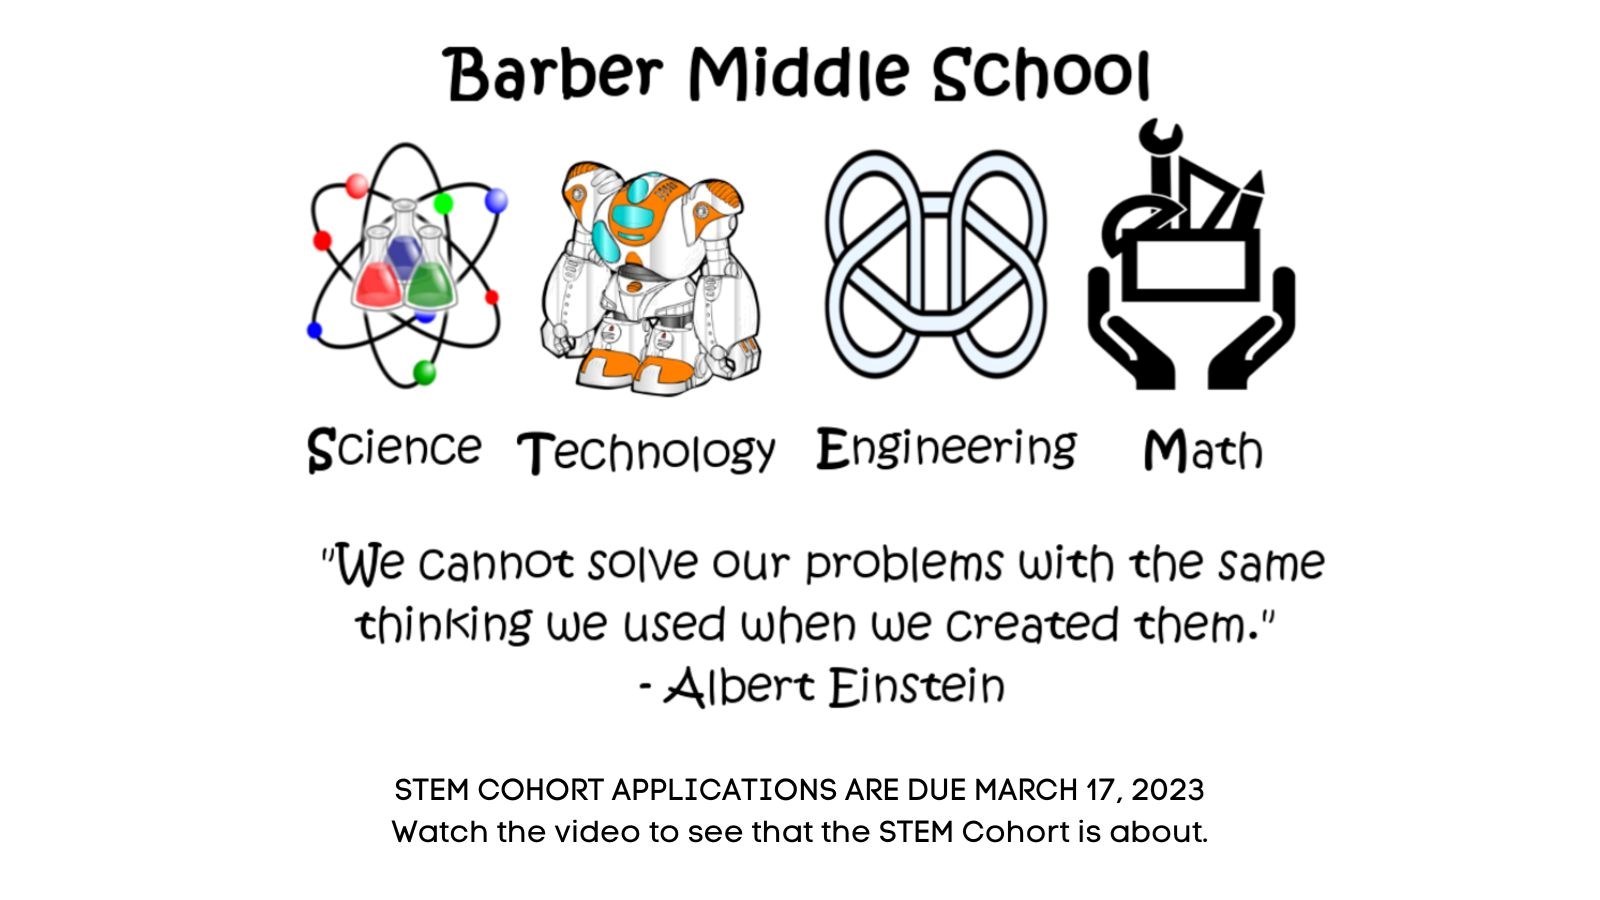 STEM Cohort applications are due March 17th. Watch the video to see what the stem cohort is about.